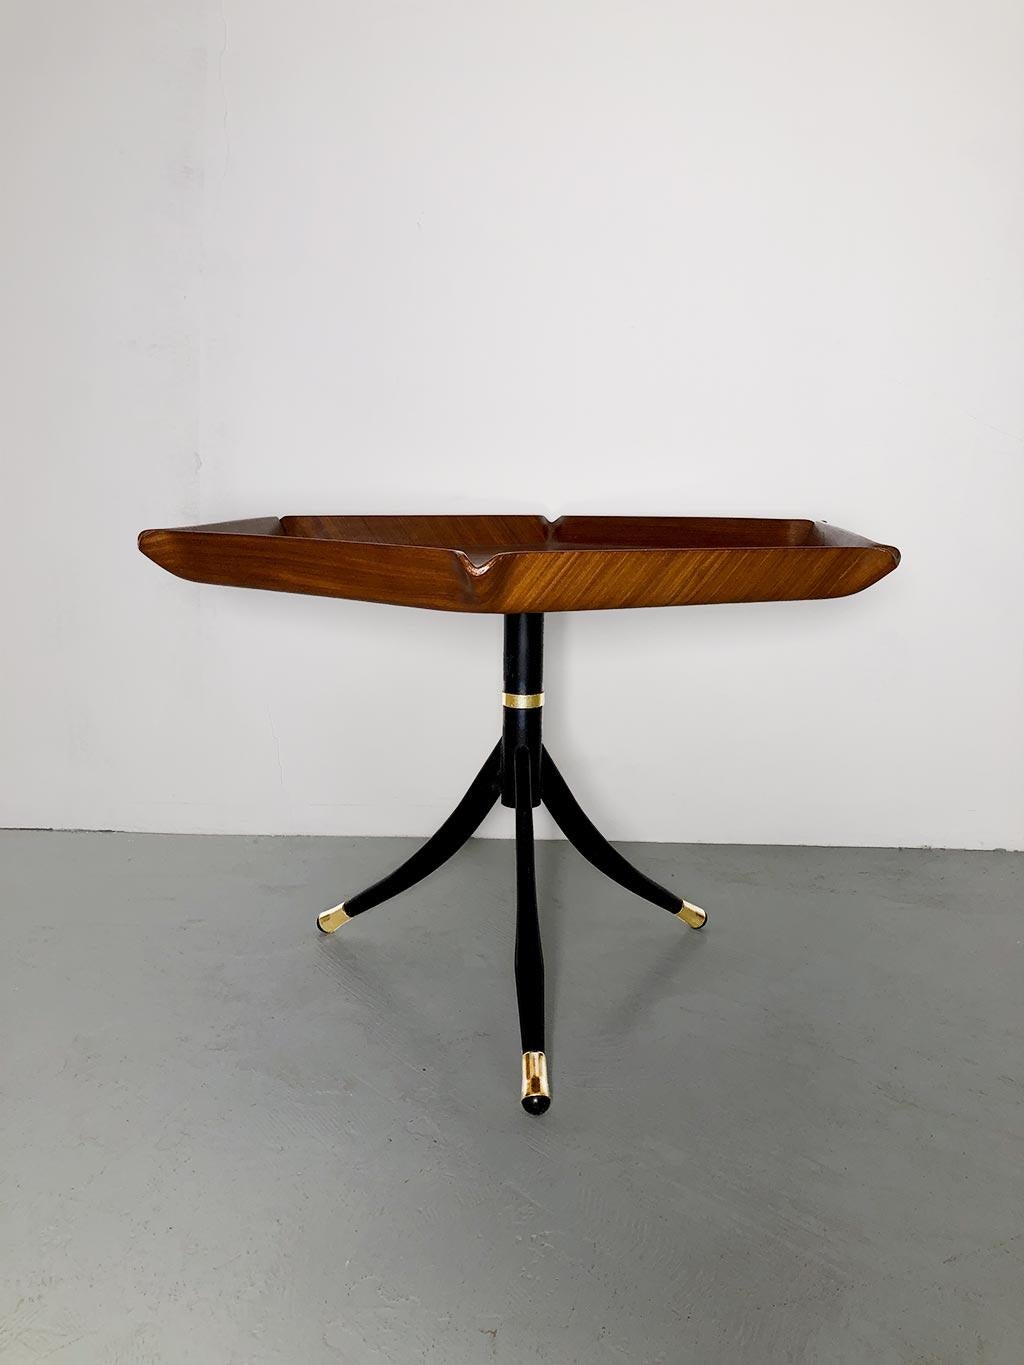 Italian coffee table, produced in the style of Franco Campo and Carlo Graffi (both part of and collaborators with the Turin school of Carlo Mollino). Hexagonal top made of curved and molded teak wood, black lacquered metal frame with gold inserts.